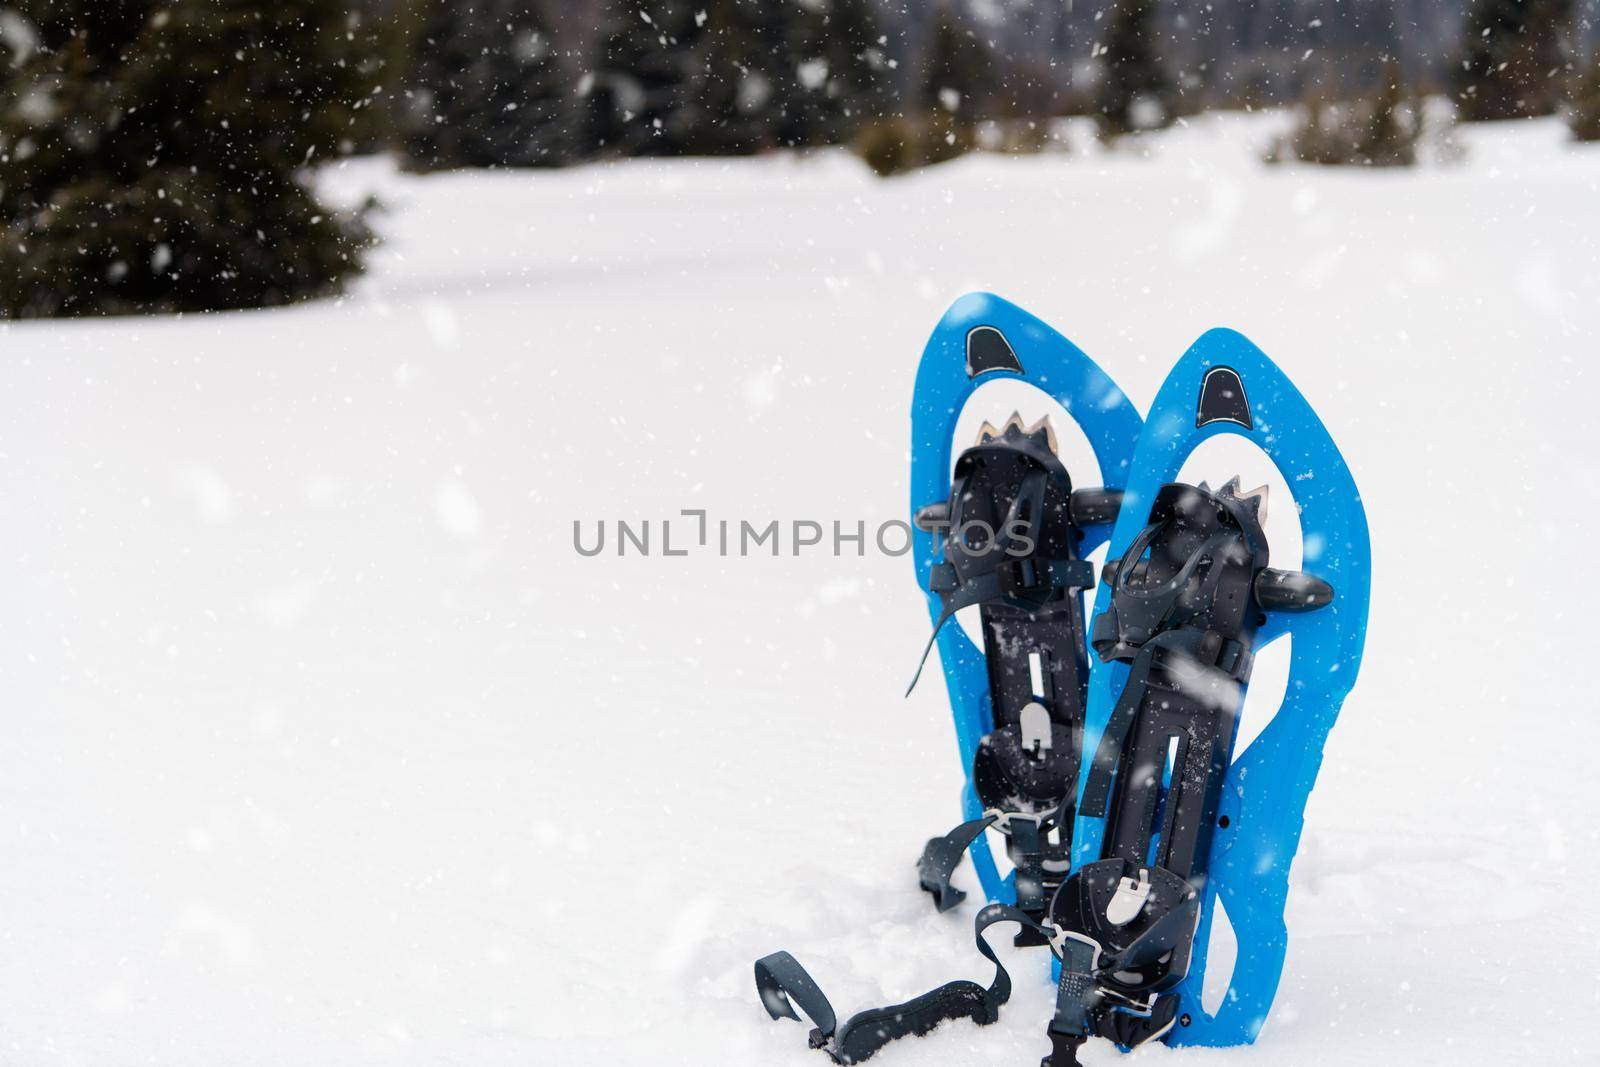 Winter hiking in the mountains  Blue snowshoes in fresh show with snowflakes around them on snowy winter day